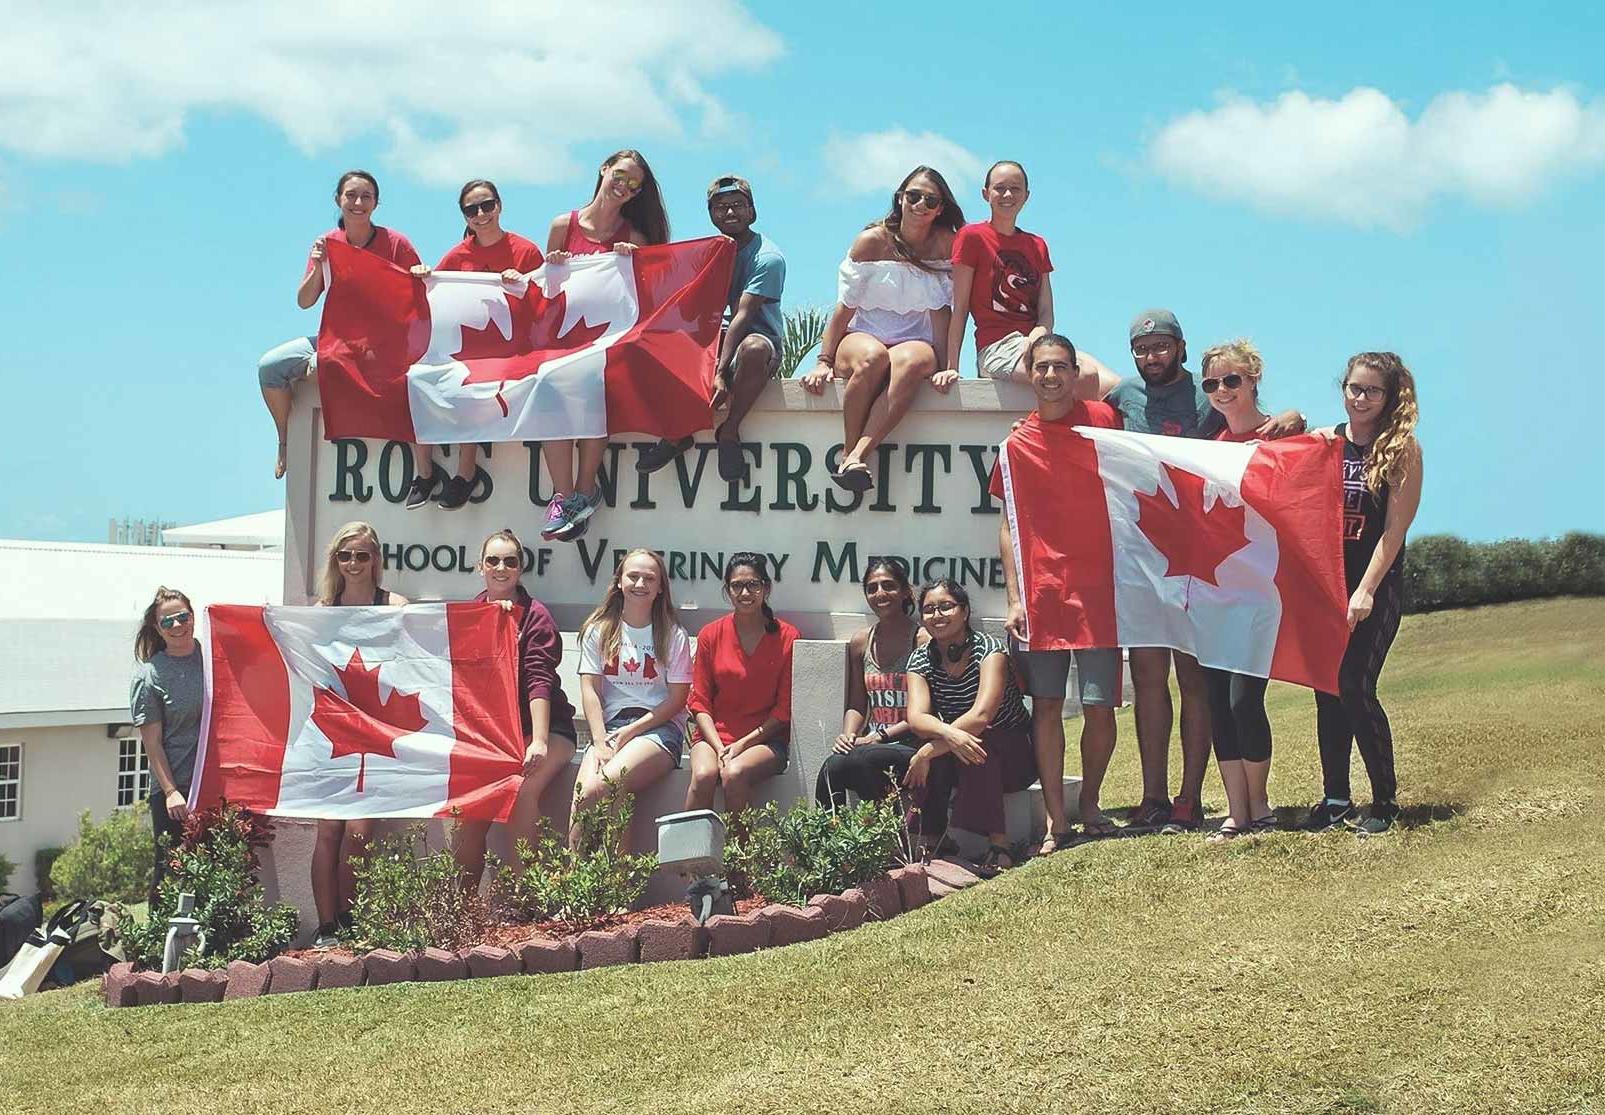 Canadian students holding Canadian flags next to the Ross University School for Veterinary Medicine sign 